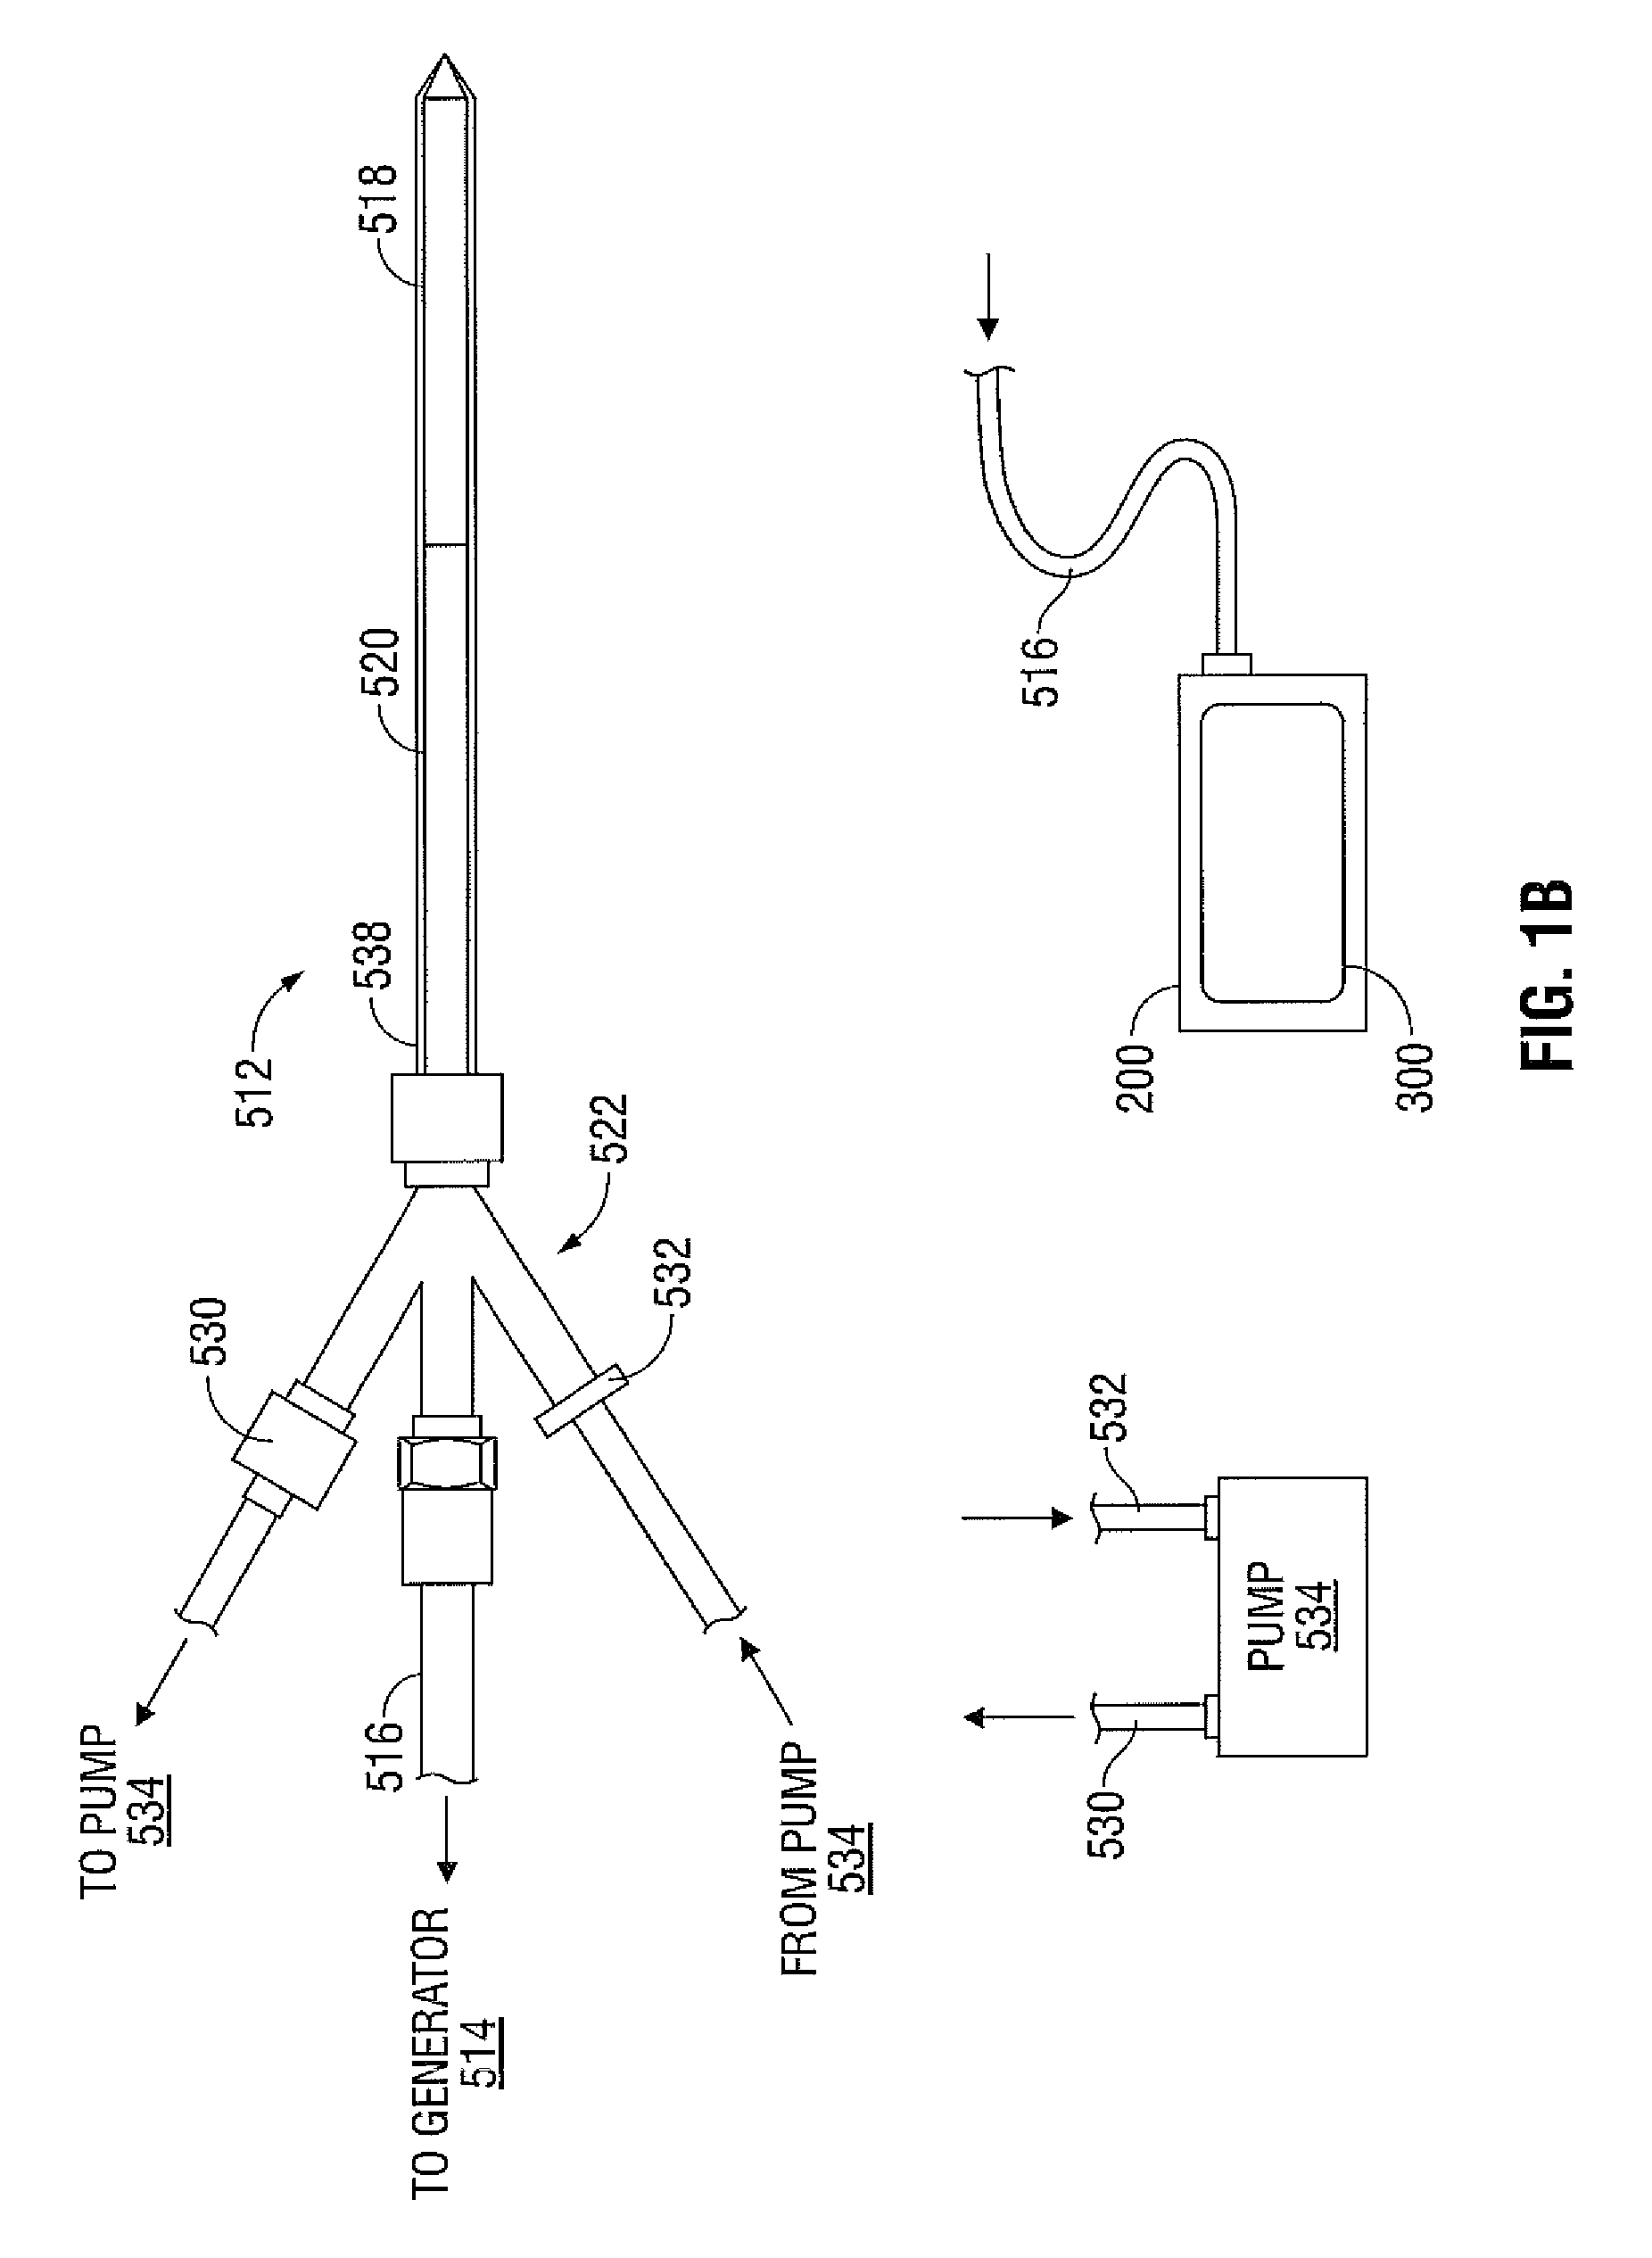 System and Method for Monitoring Ablation Size